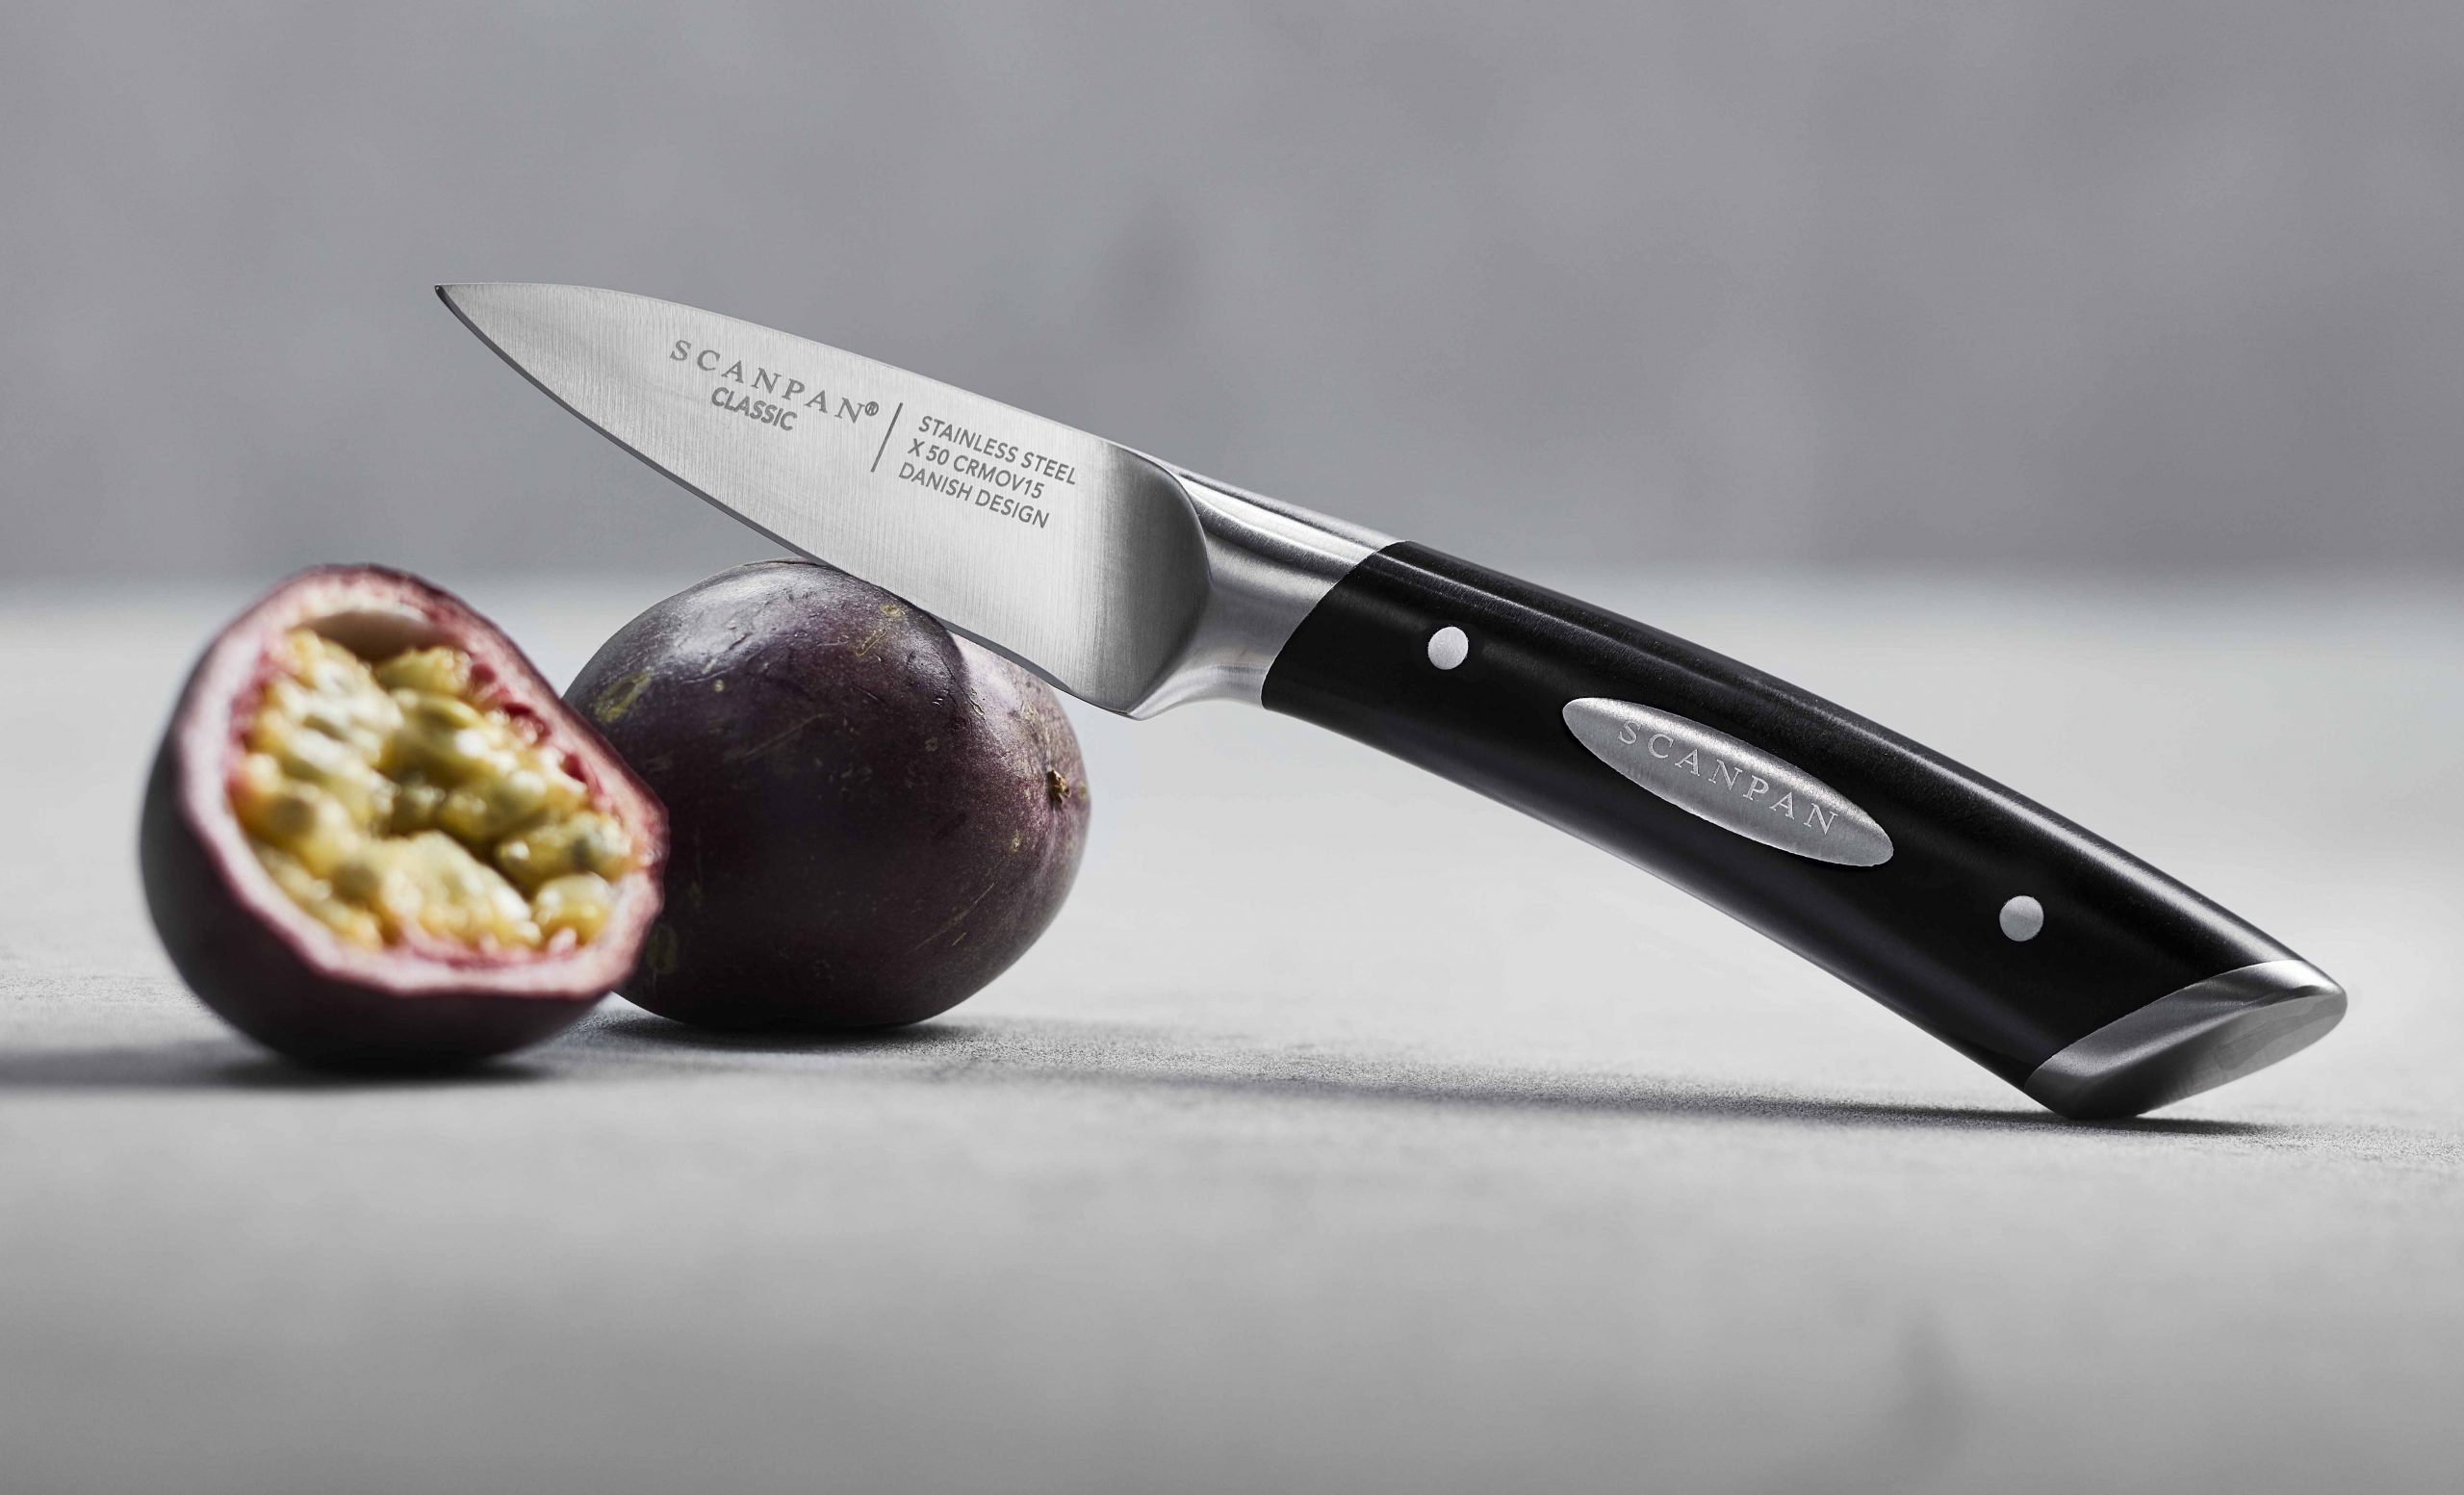 https://www.chefscomplements.co.nz/wp-content/uploads/2019/07/18101-Classic-Paring-Knife-Small-scaled.jpg